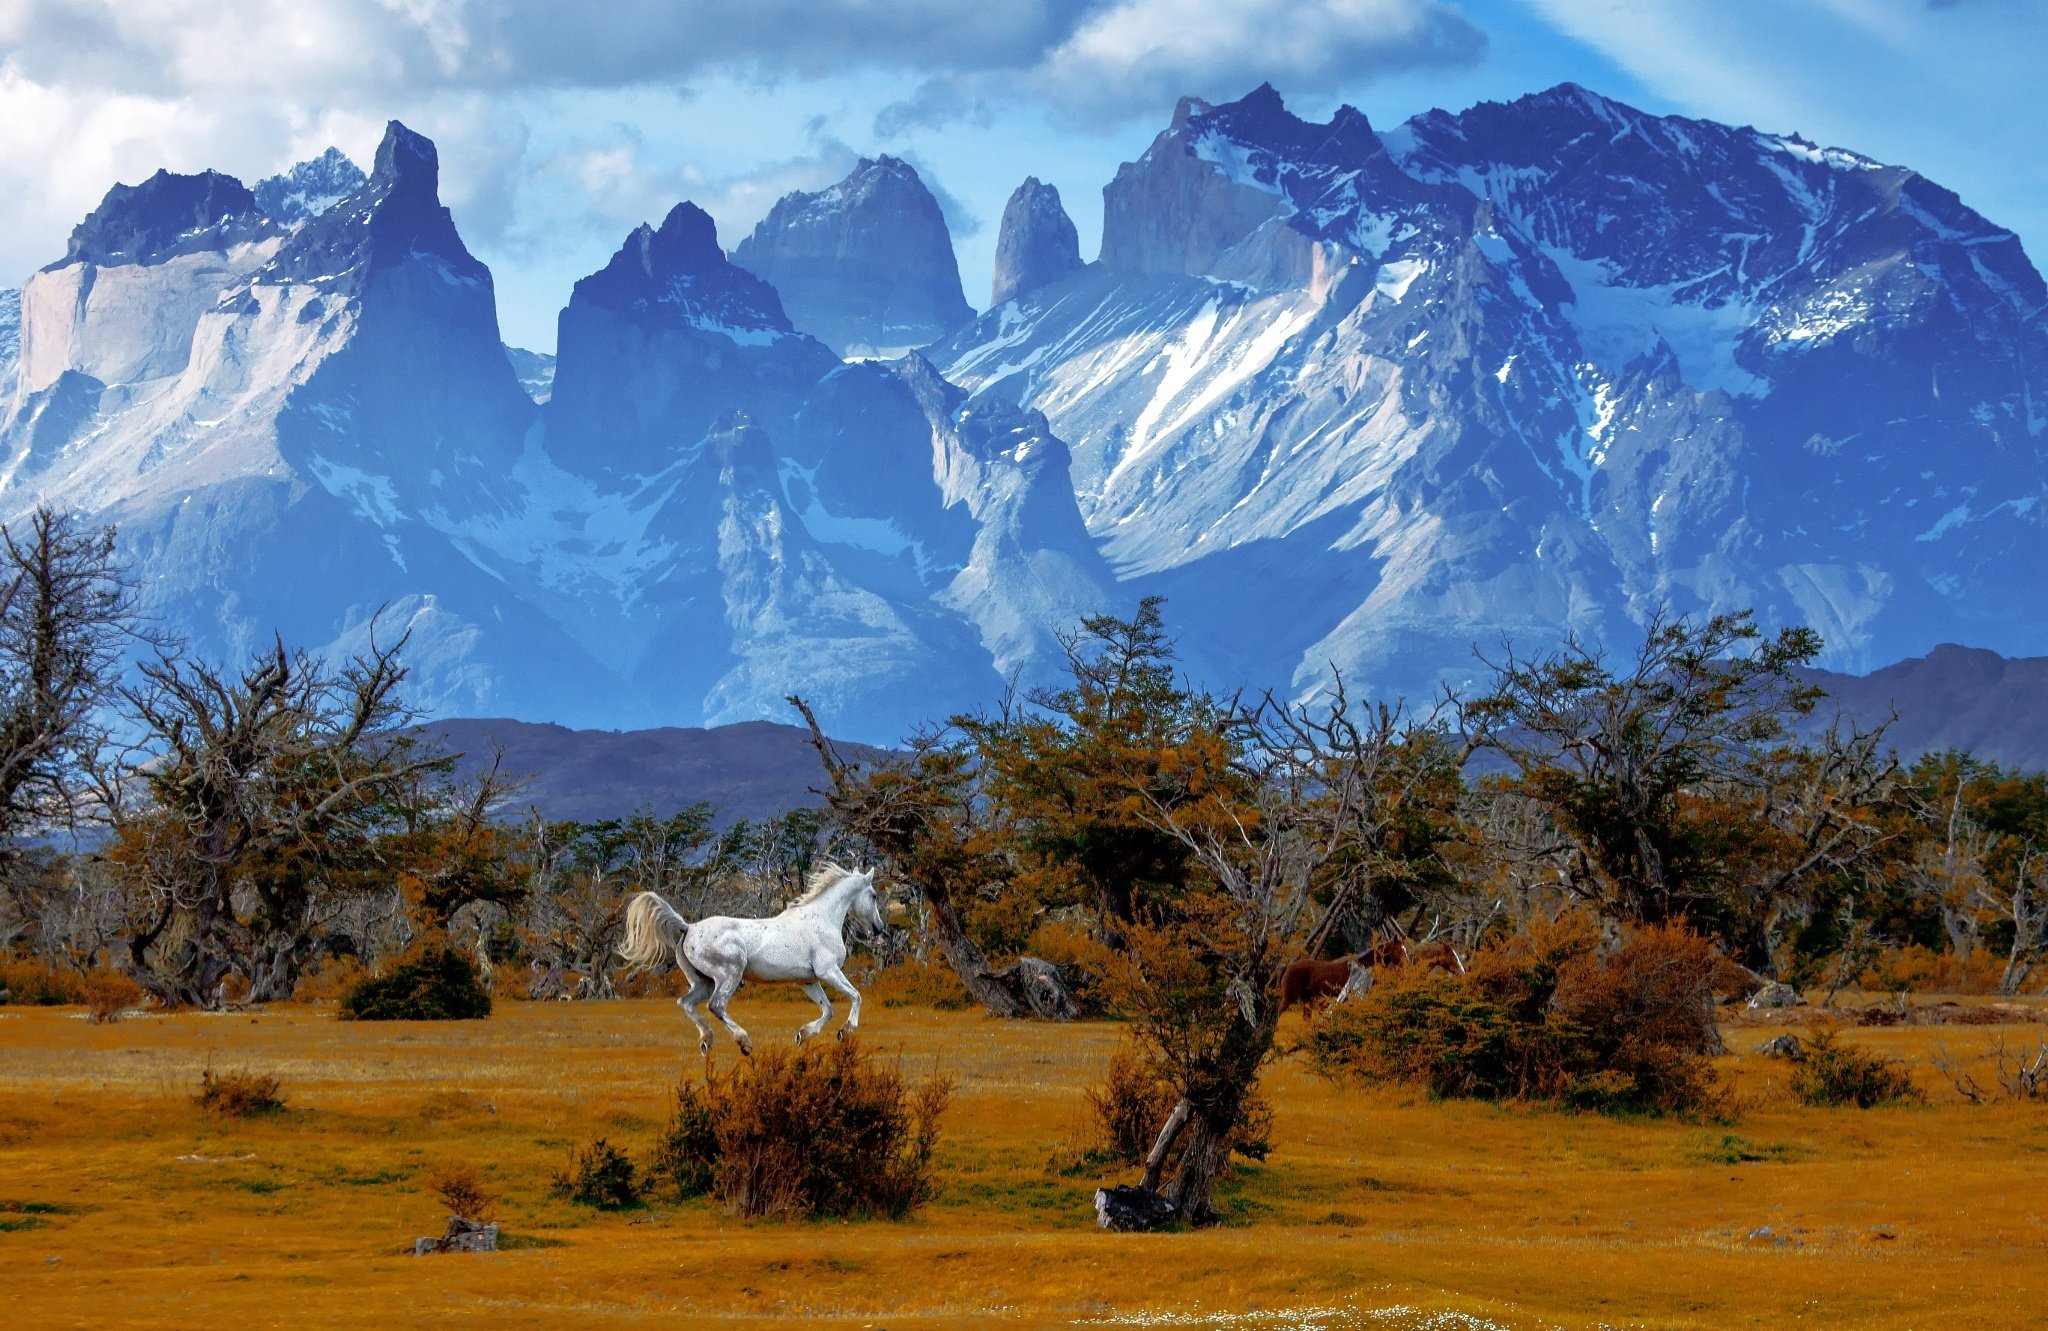 mountains, Trees, Horse, National, Park, Torres, Del, Paine, National, Park, Chile, Patagonia, Autumn Wallpaper HD / Desktop and Mobile Background